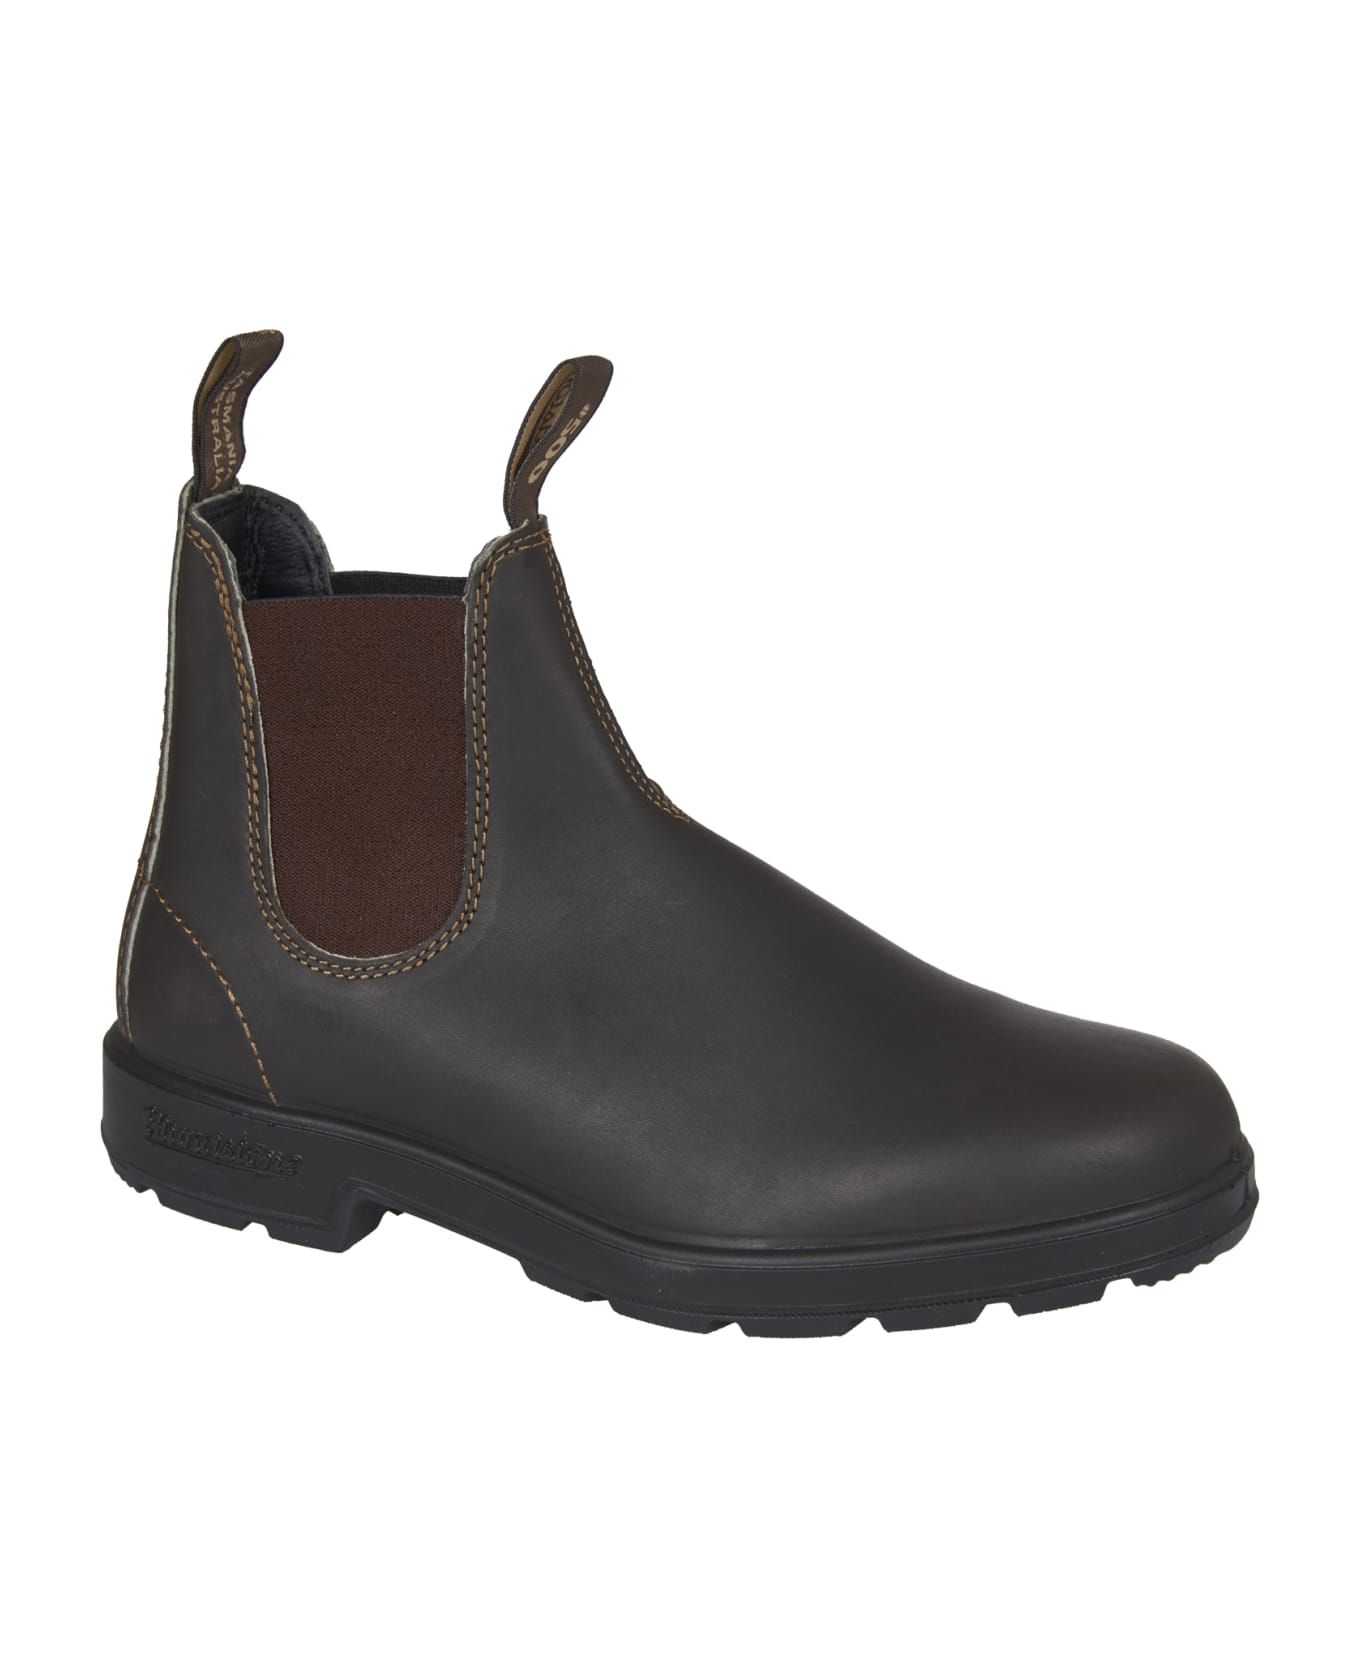 Blundstone Brown 510 Ankle Boots - Stout Brown